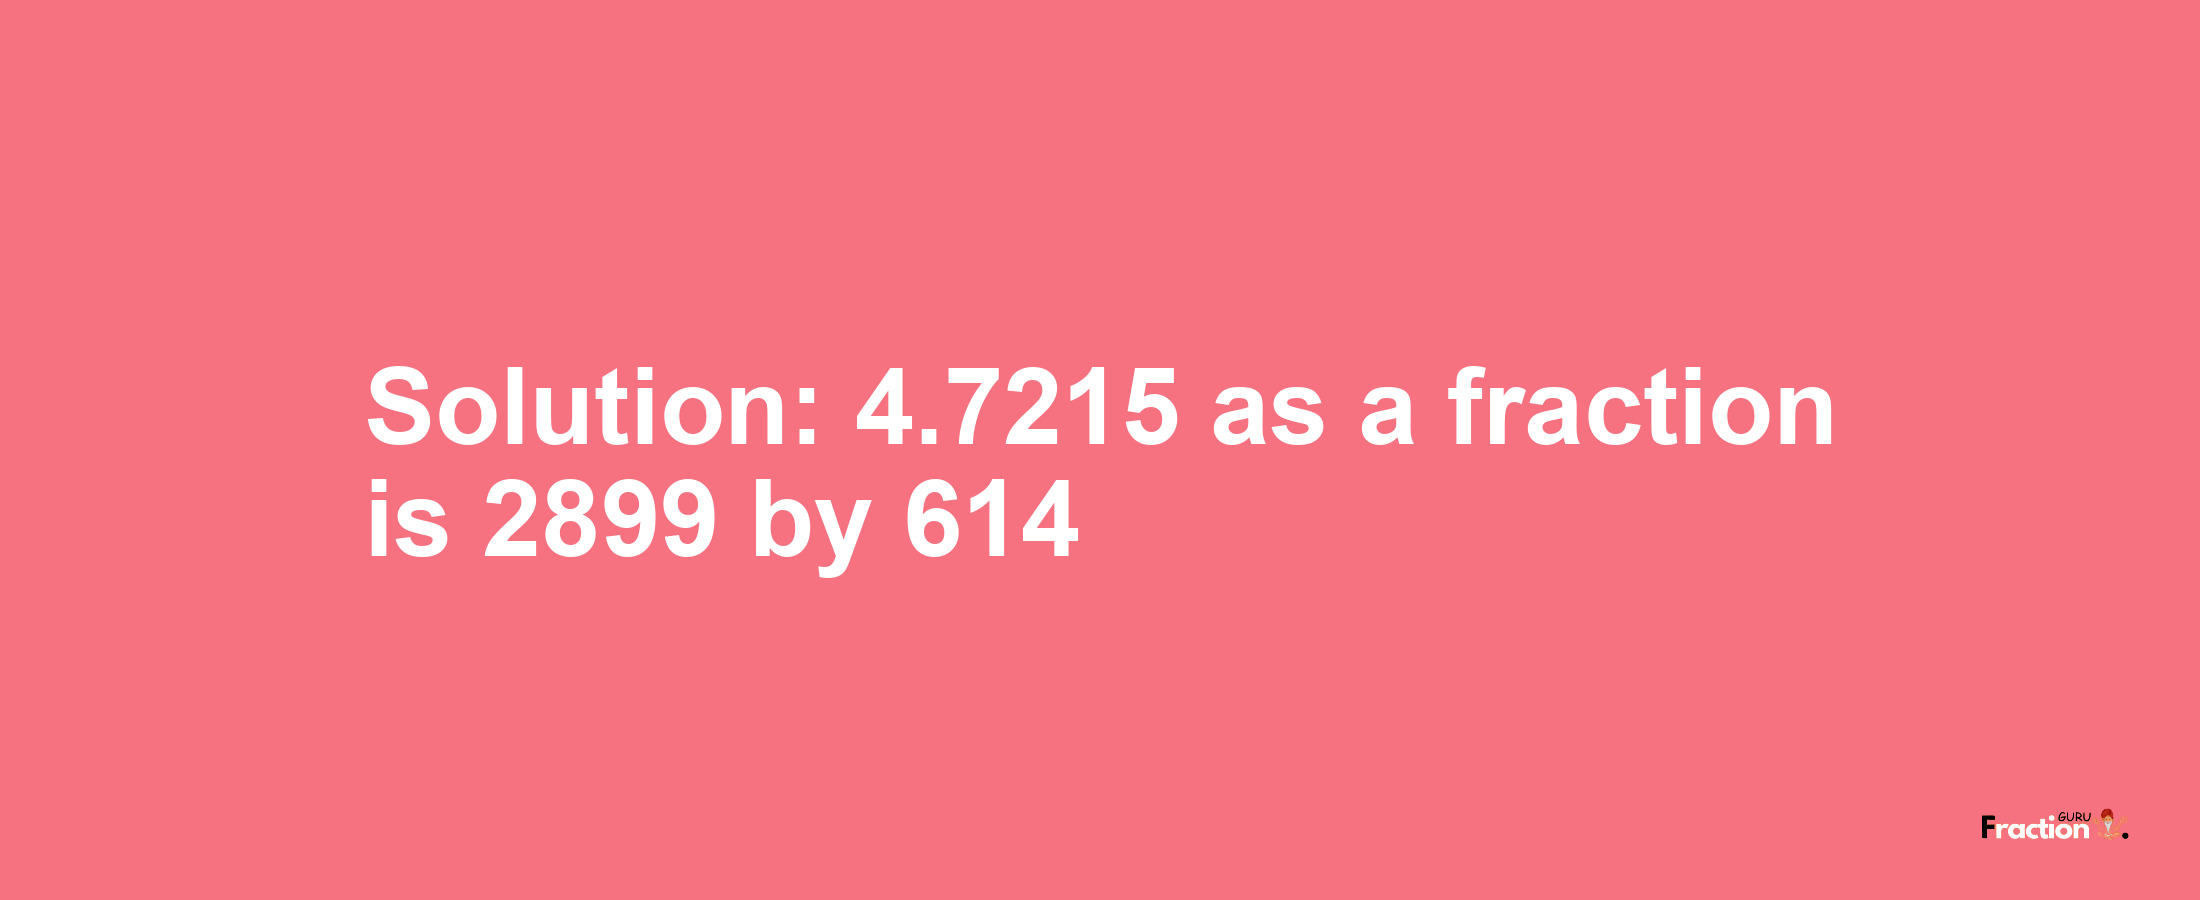 Solution:4.7215 as a fraction is 2899/614